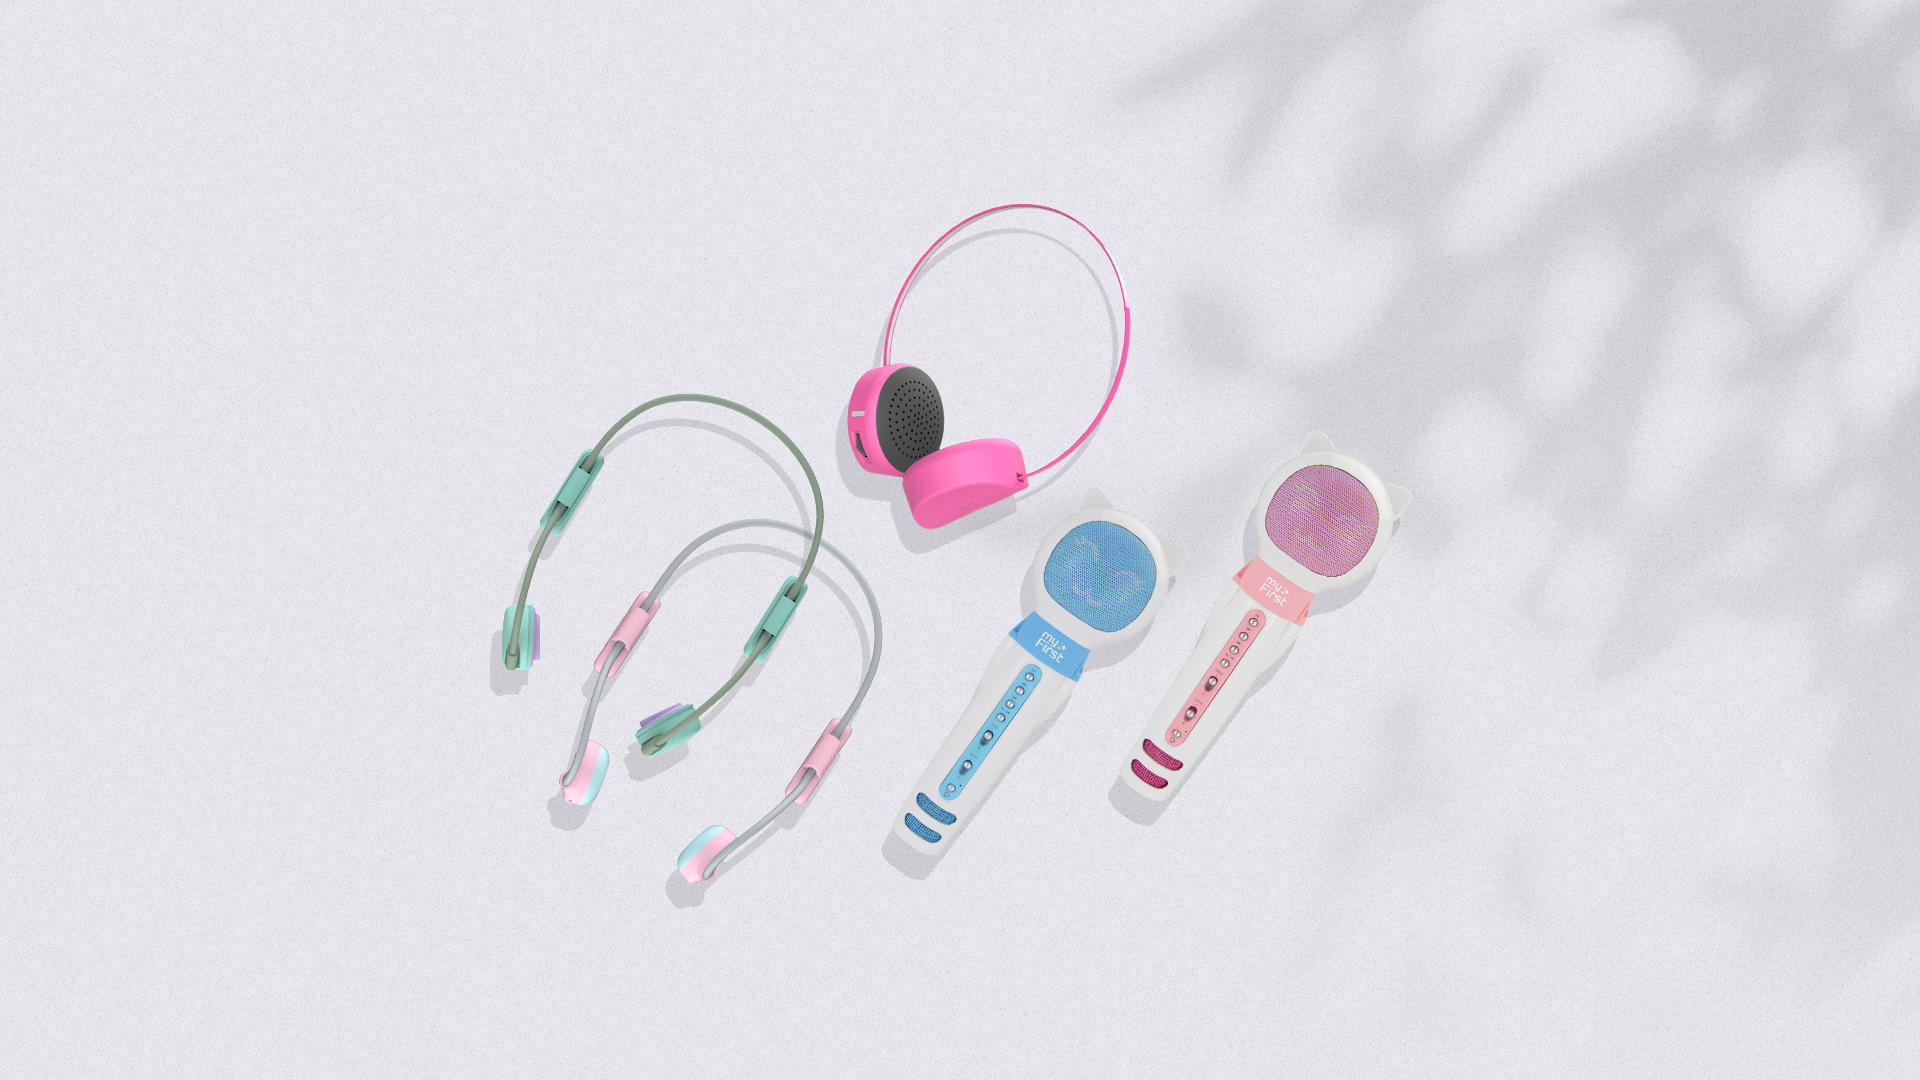 myFirst Headphones Collection with myFirst Voice, Karaoke set for kids, myFirst Headphones Bone Conduction for kids